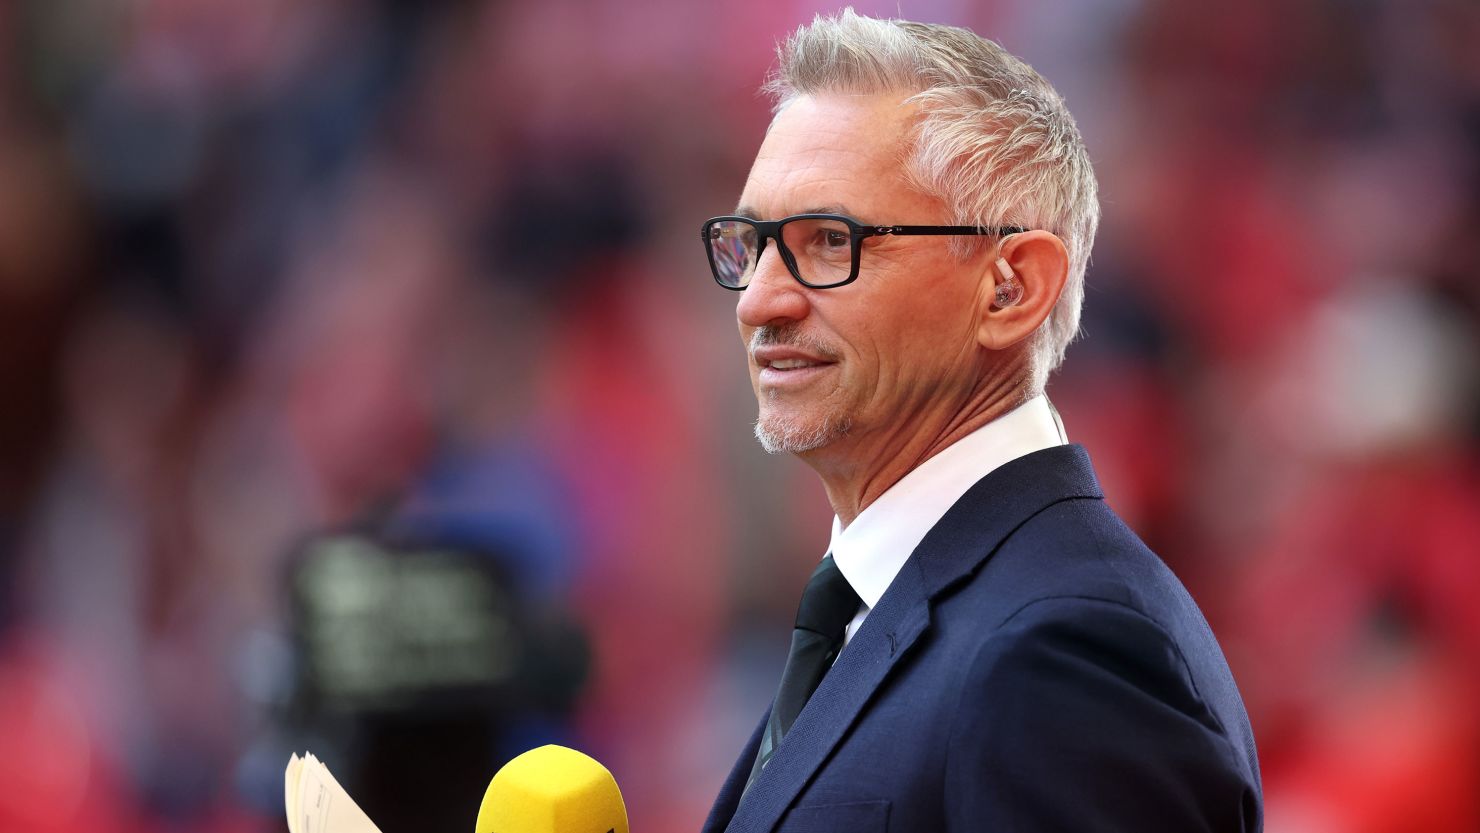 Gary Lineker criticized British government policy on Twitter.